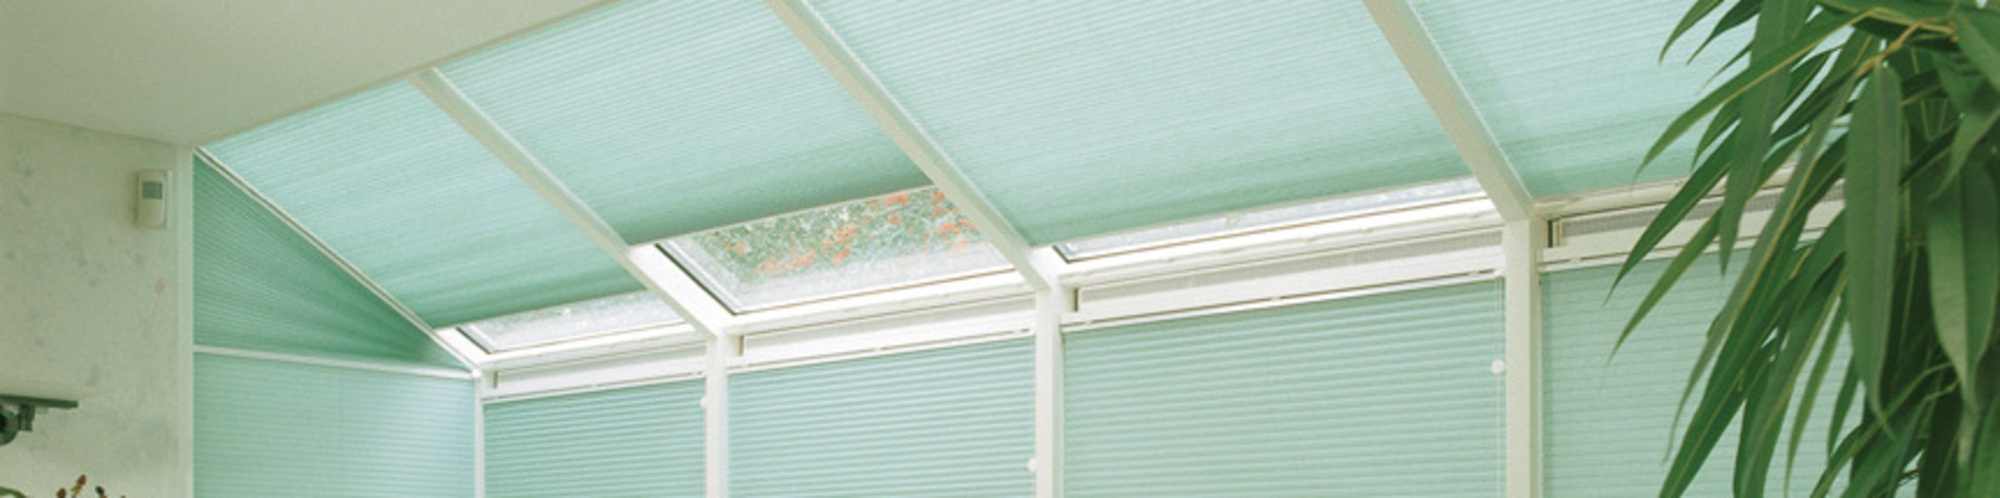 Duette Blinds, like these blue ones hung in a conservatory, are able to help you save energy. Find out more at Blind Revolution.